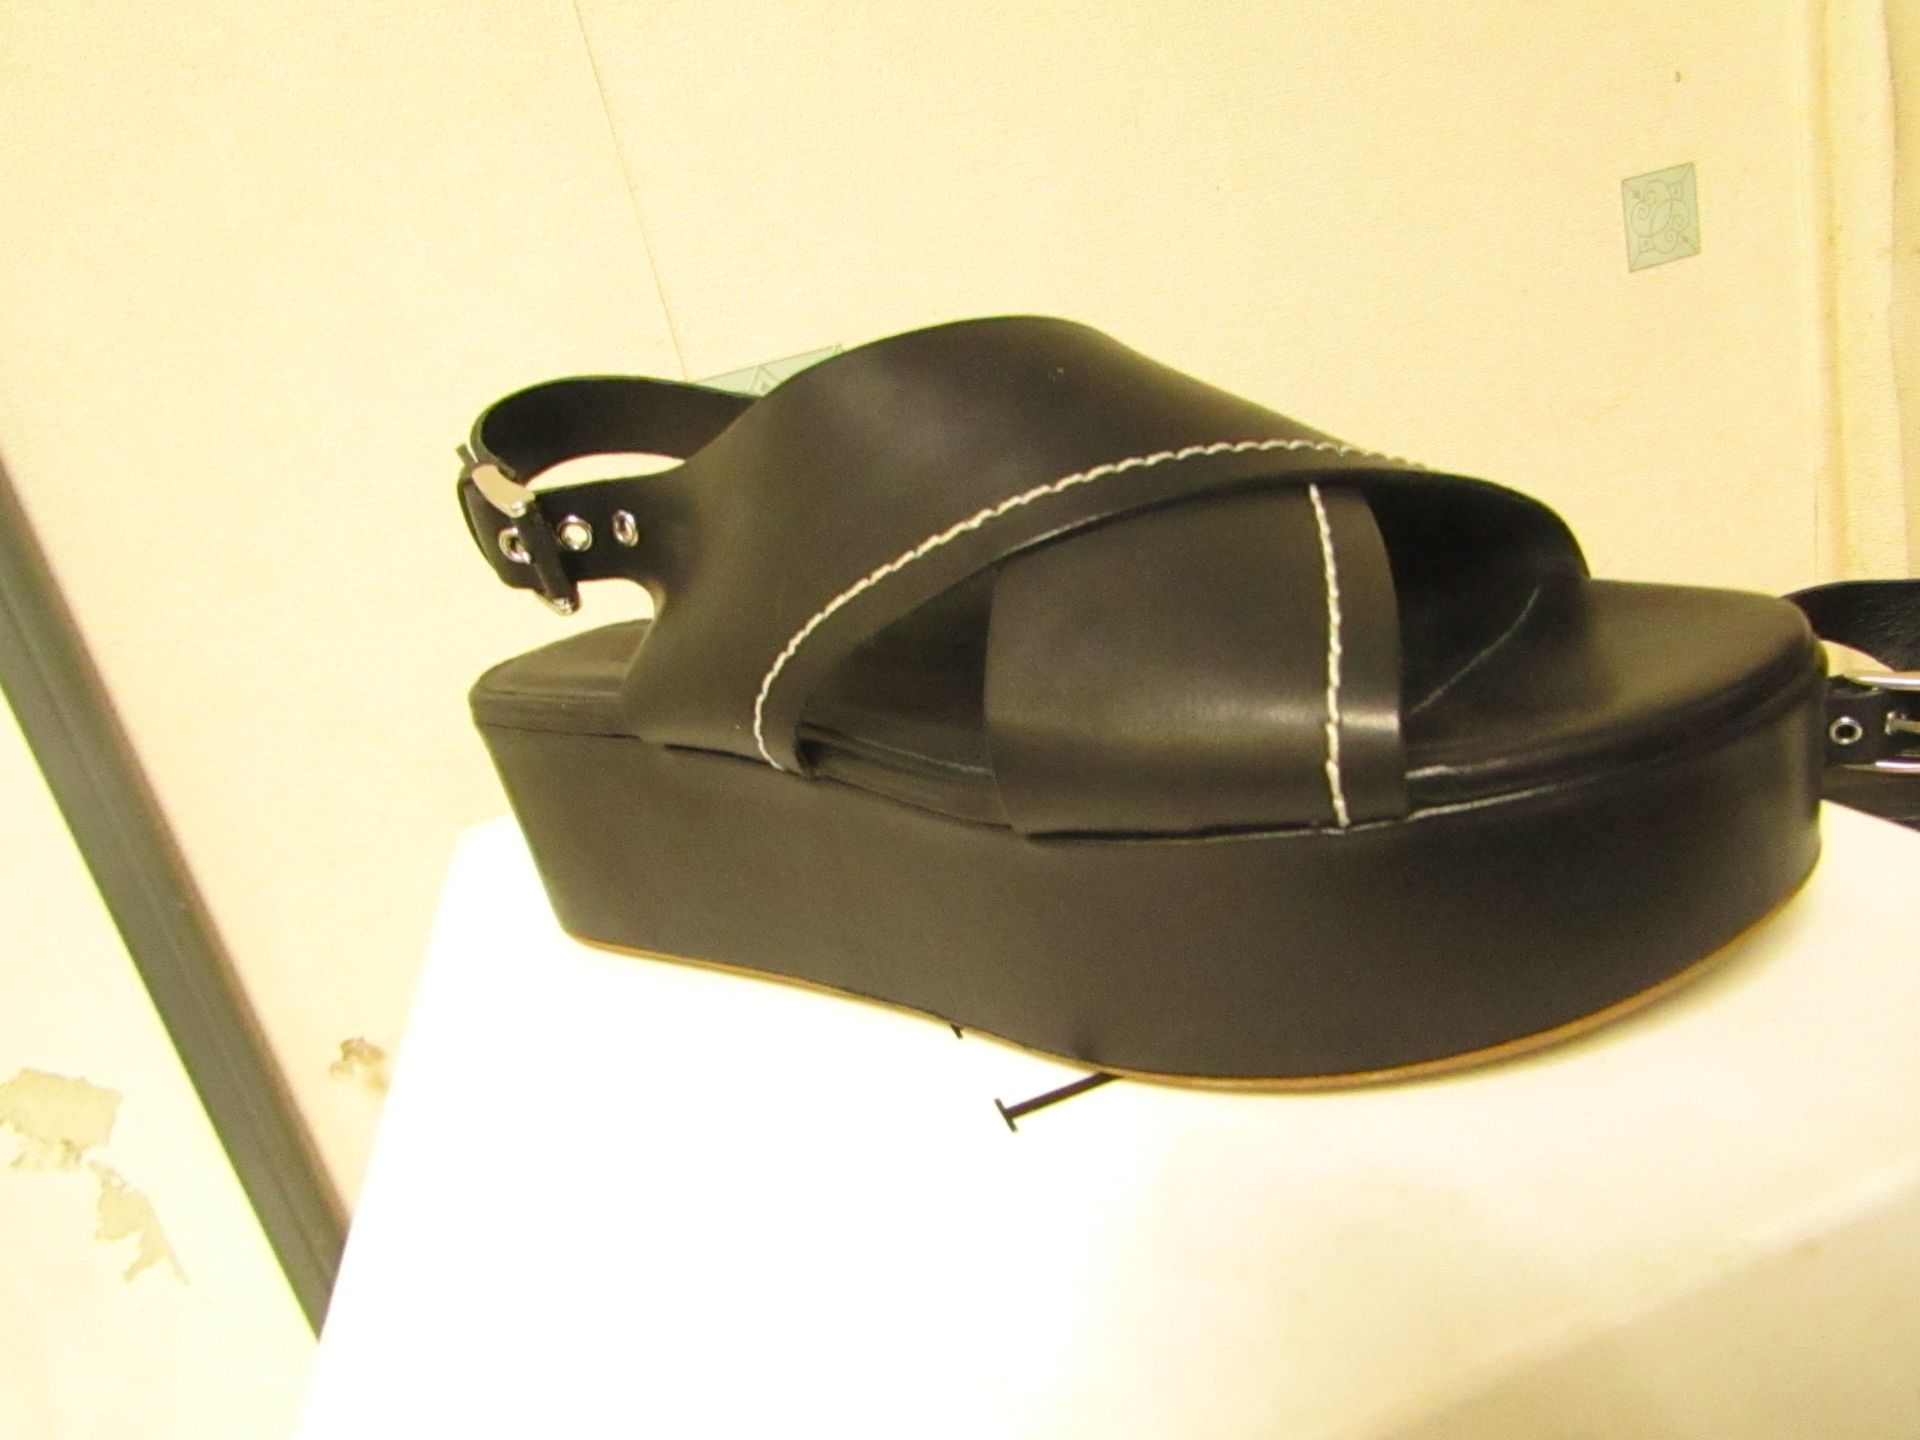 L K Bennett London Sima Black Veg Leather Shoes size 39 RRP £250 new & boxed see image for design